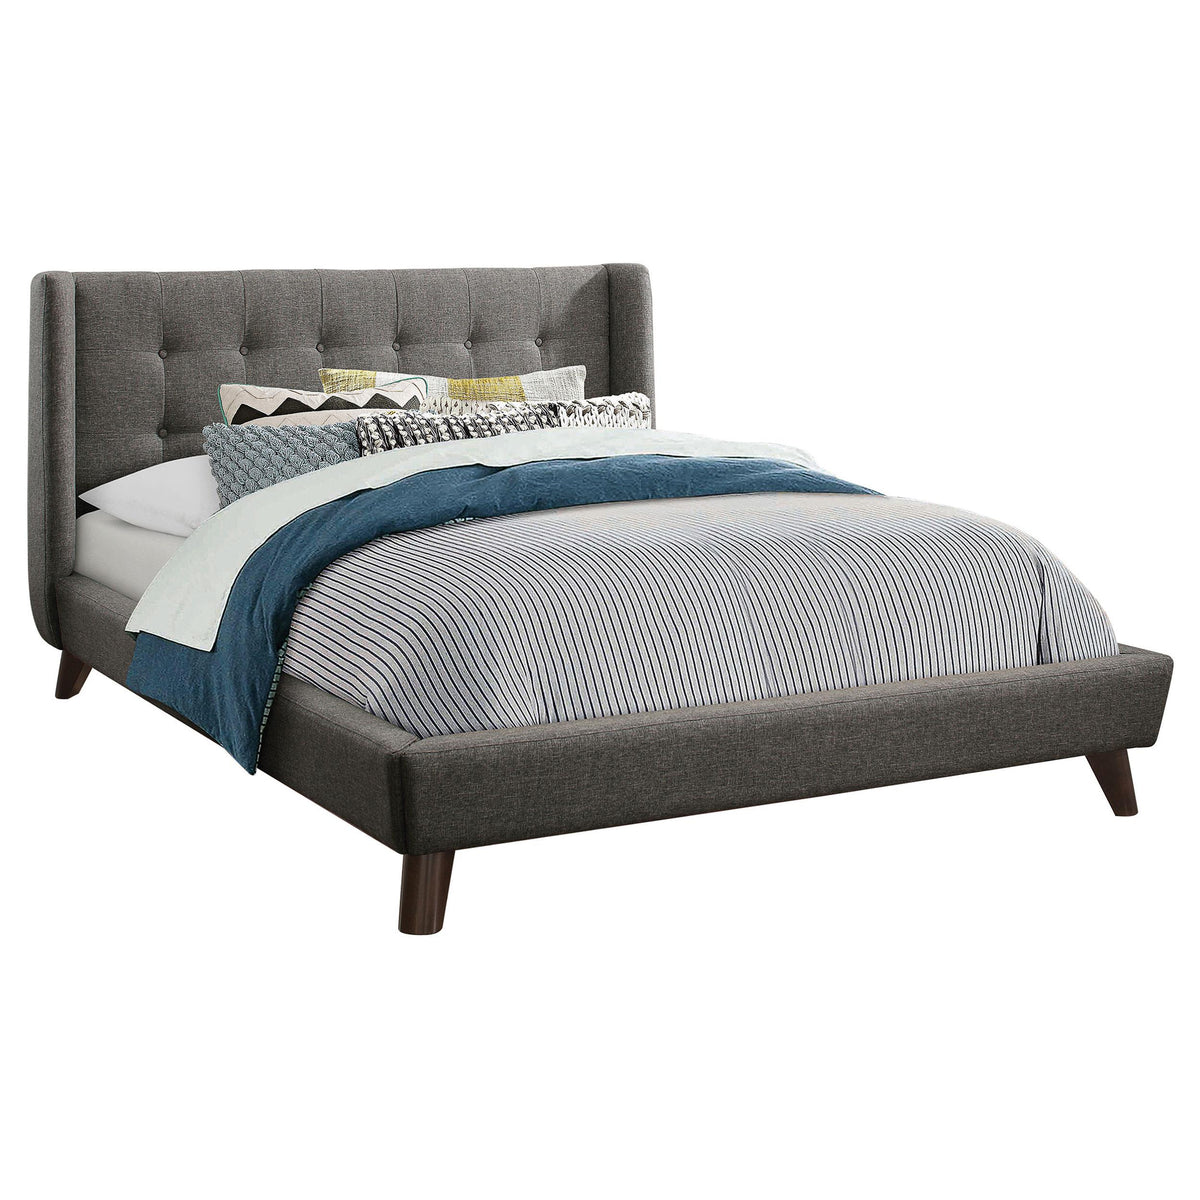 Carrington Button Tufted Eastern King Bed Grey Carrington Button Tufted Eastern King Bed Grey Half Price Furniture